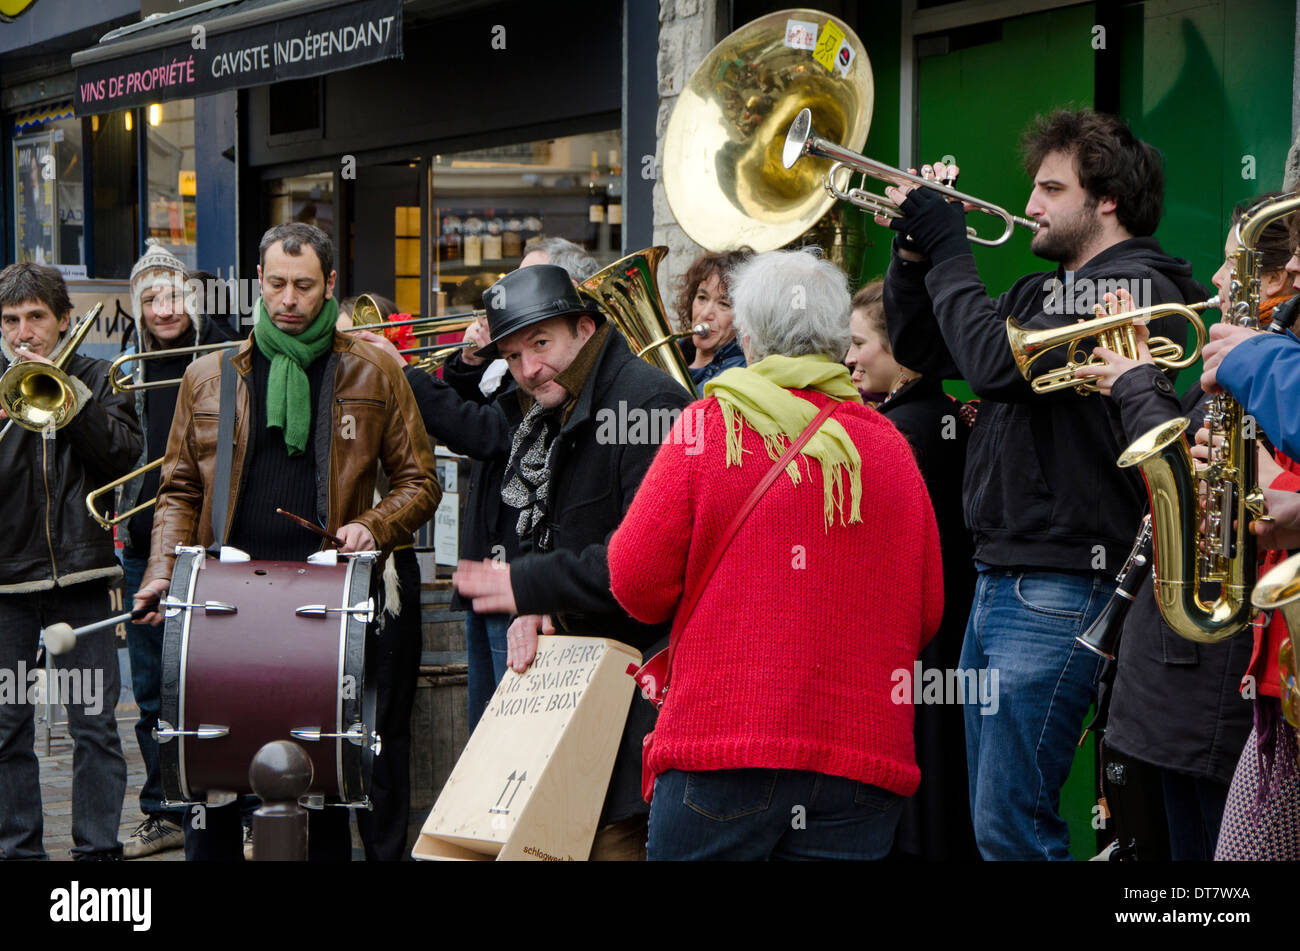 Street musicians giving a performance in a street in Paris, France. Stock Photo